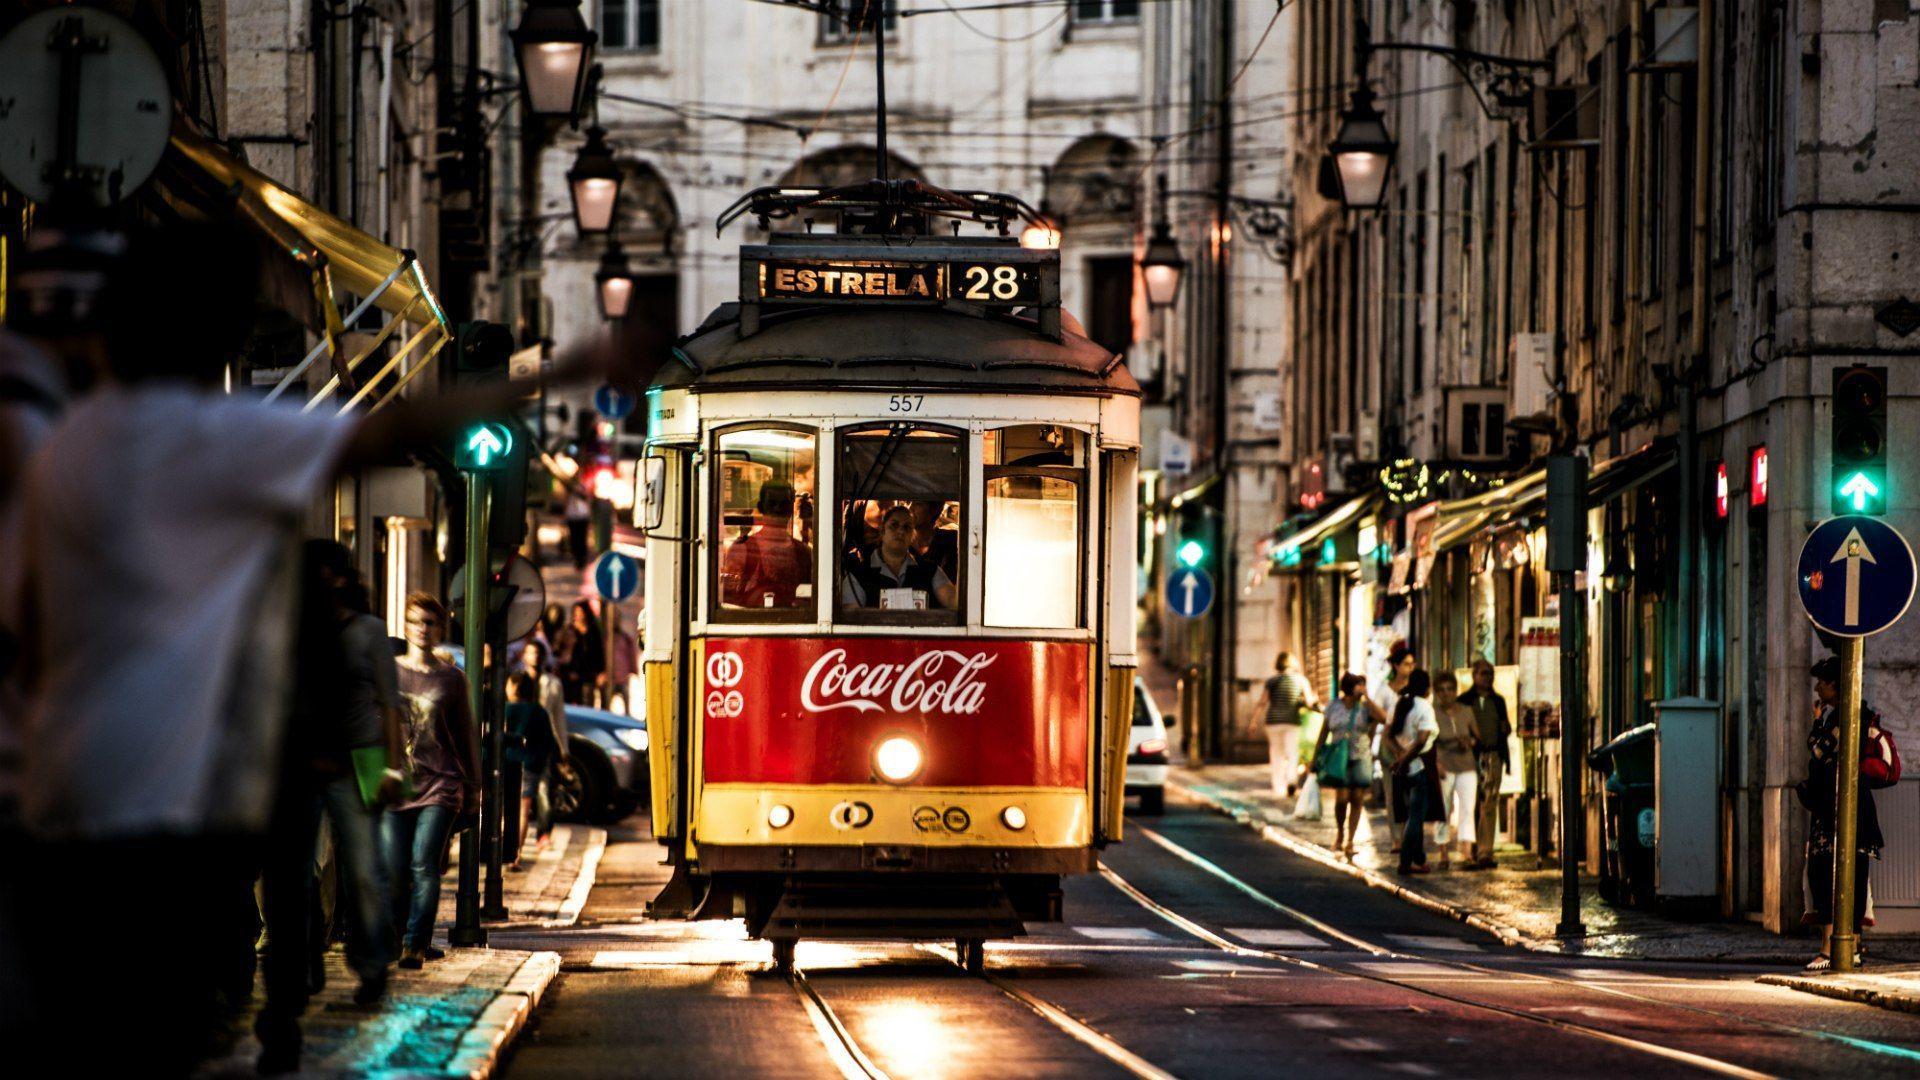 Tram in Lisbon, Portugal wallpaper and image